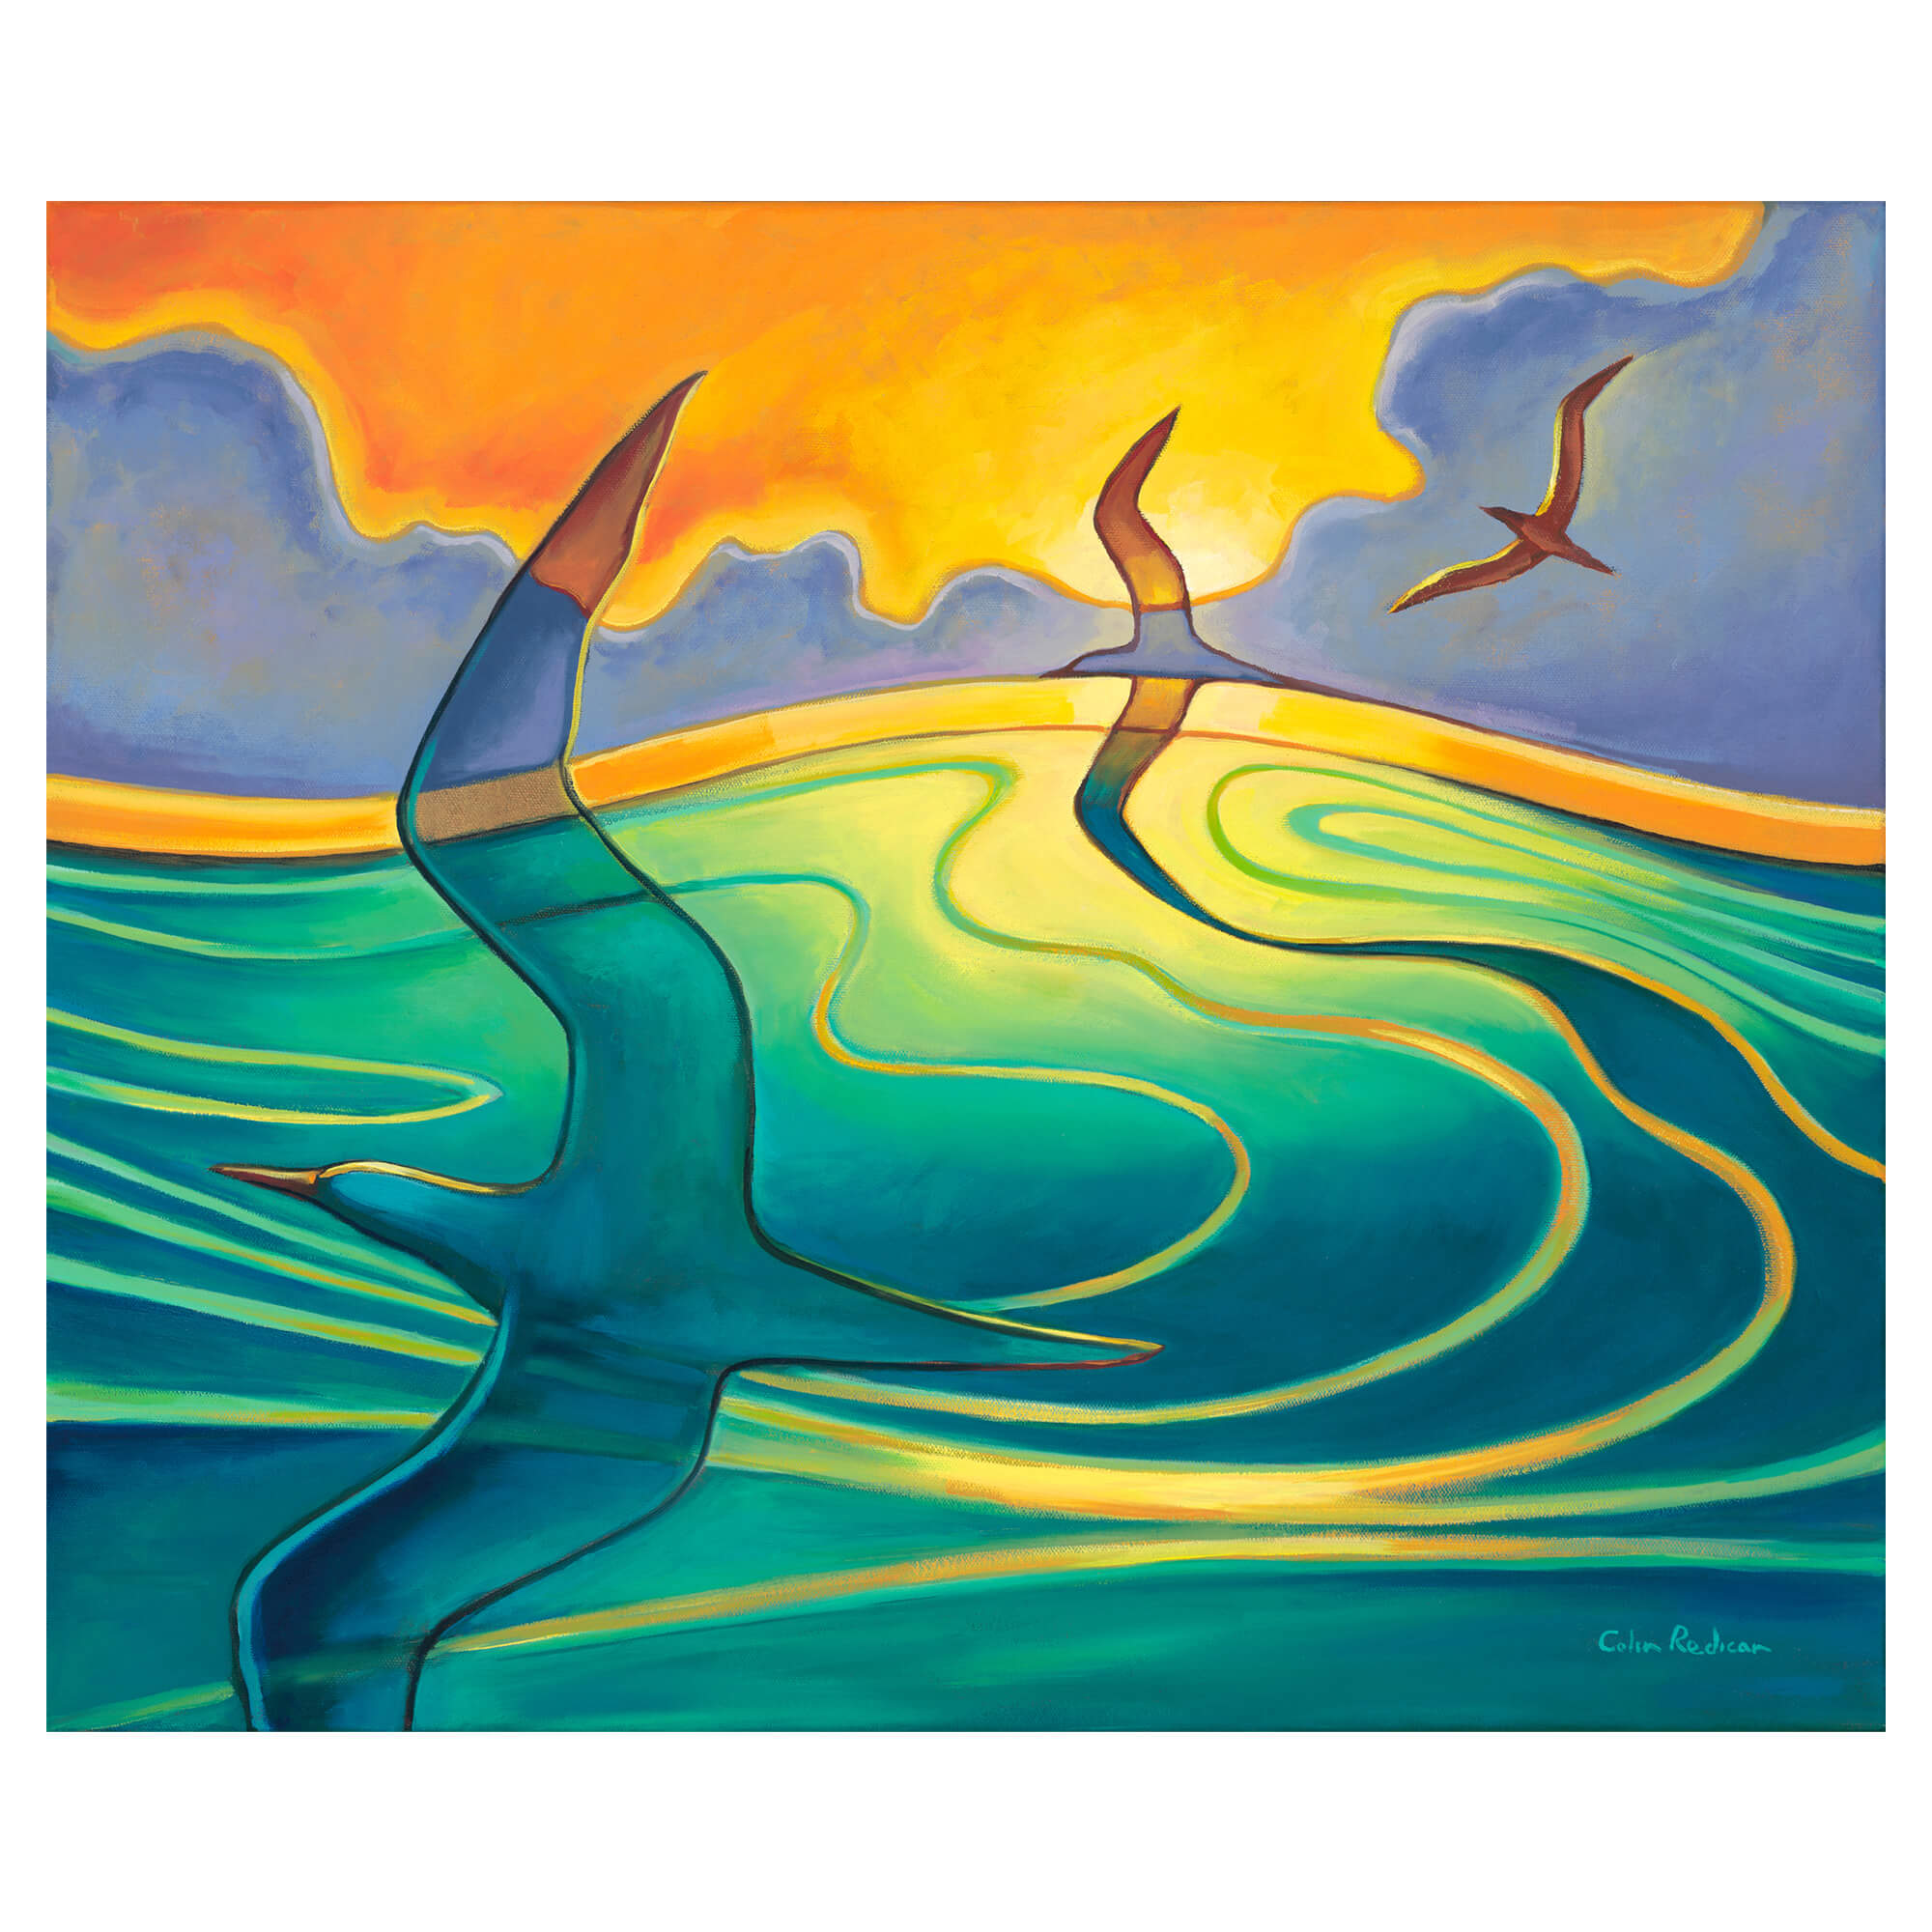 Teal-hued sky with flying birds by Hawaii artist Colin Redican